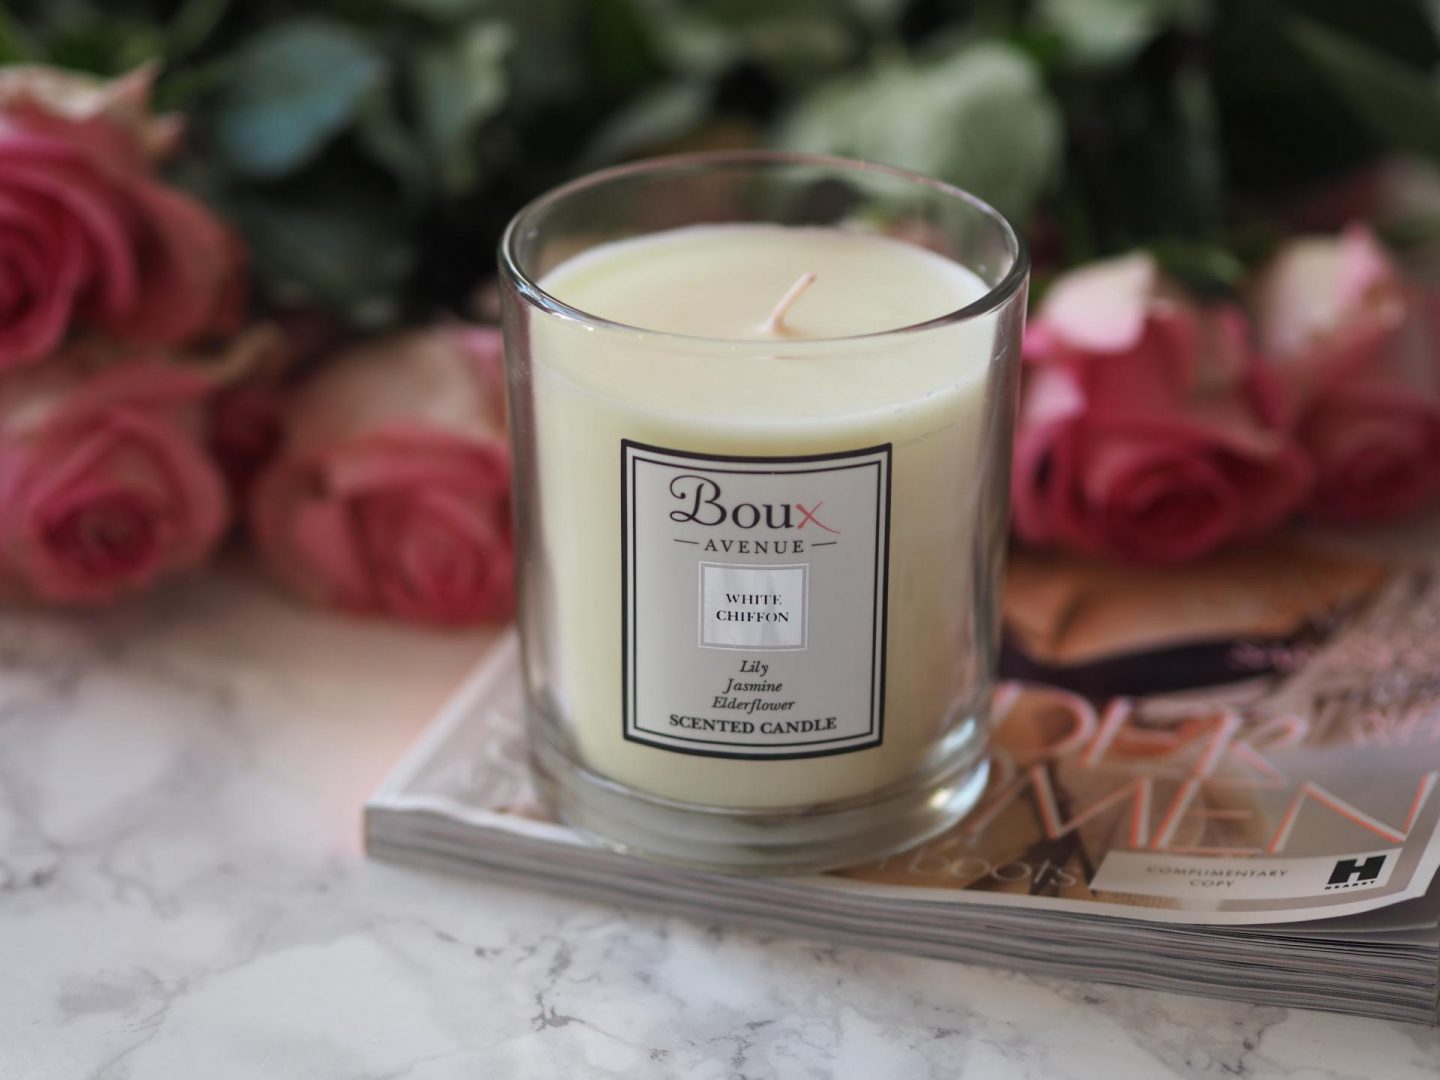 Boux Avenue White Chiffon Scented Candle in Jasmine, Lily and Elderflower